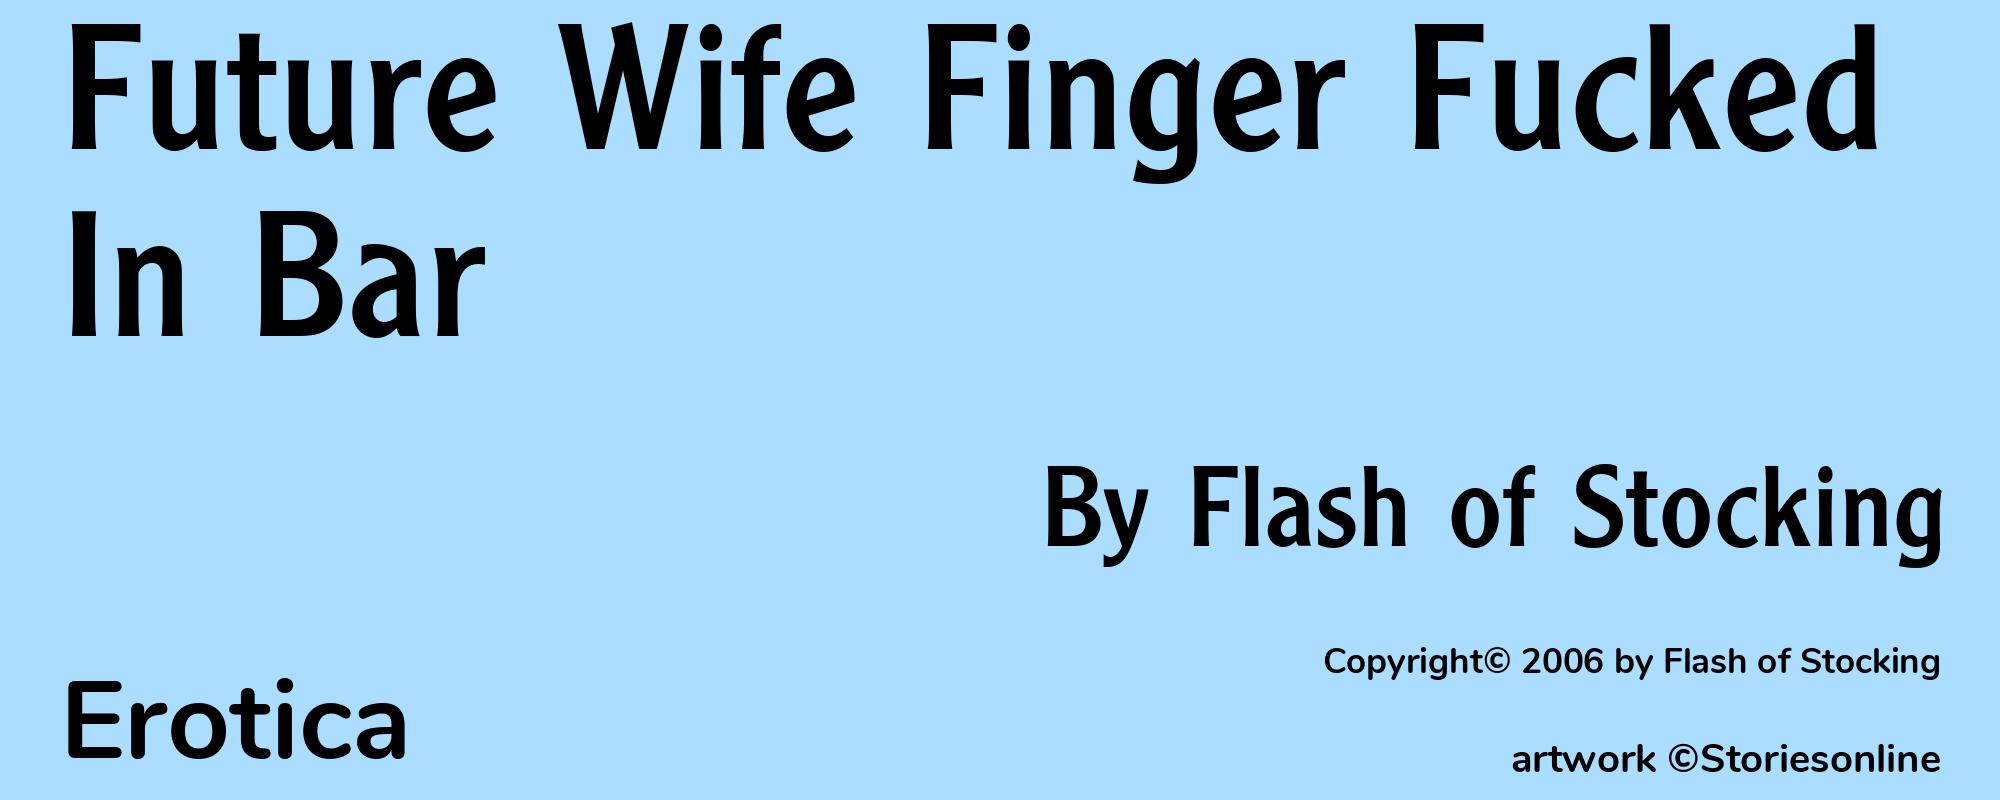 Future Wife Finger Fucked In Bar - Cover